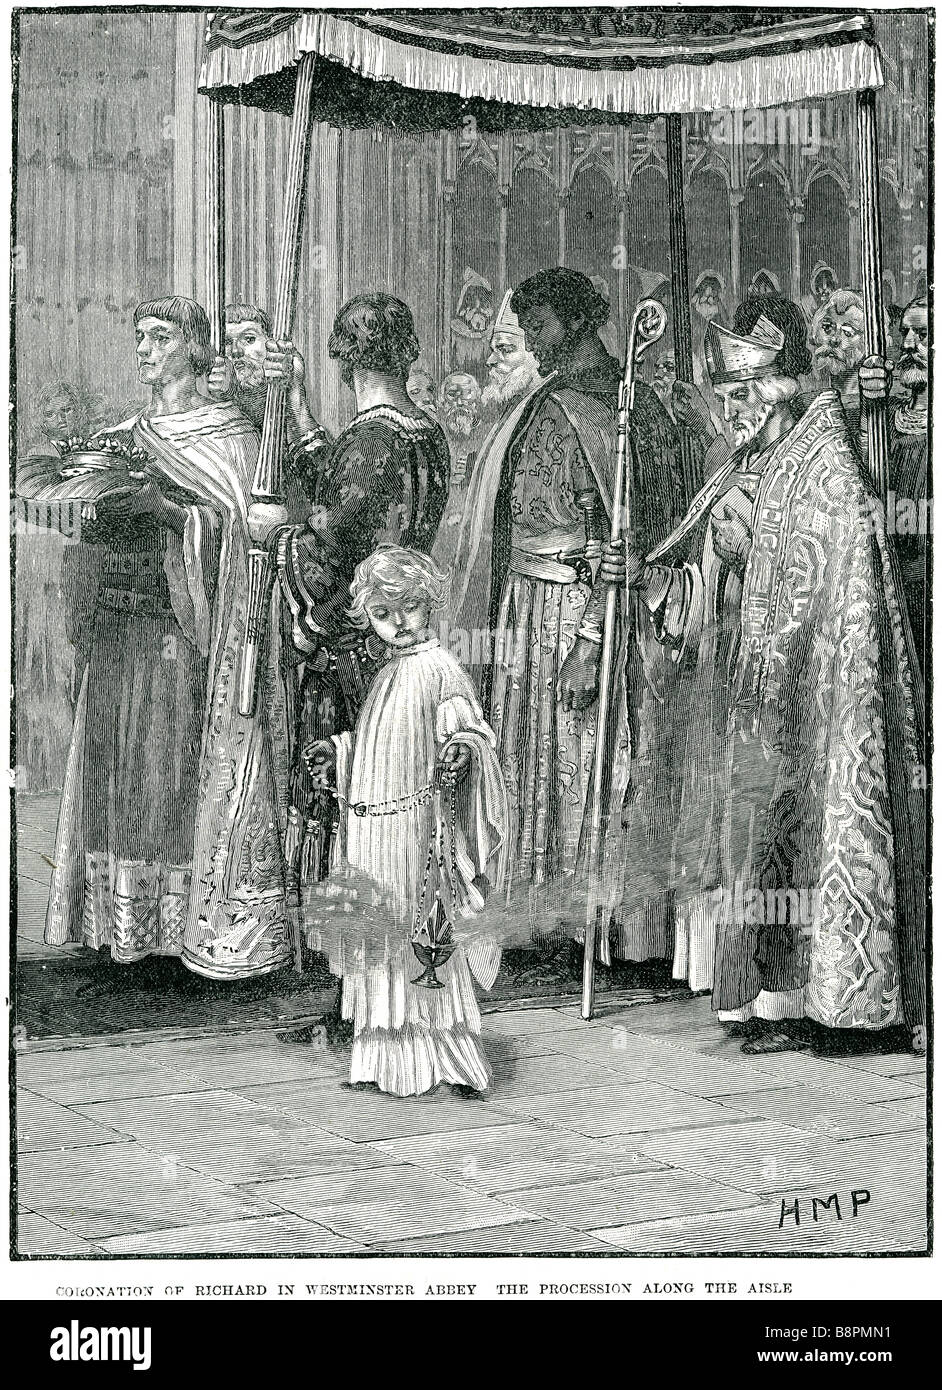 coronation of richard in westminster abbey the procession along the isle Richard I (8 September 1157 – 6 April 1199) was King of Stock Photo